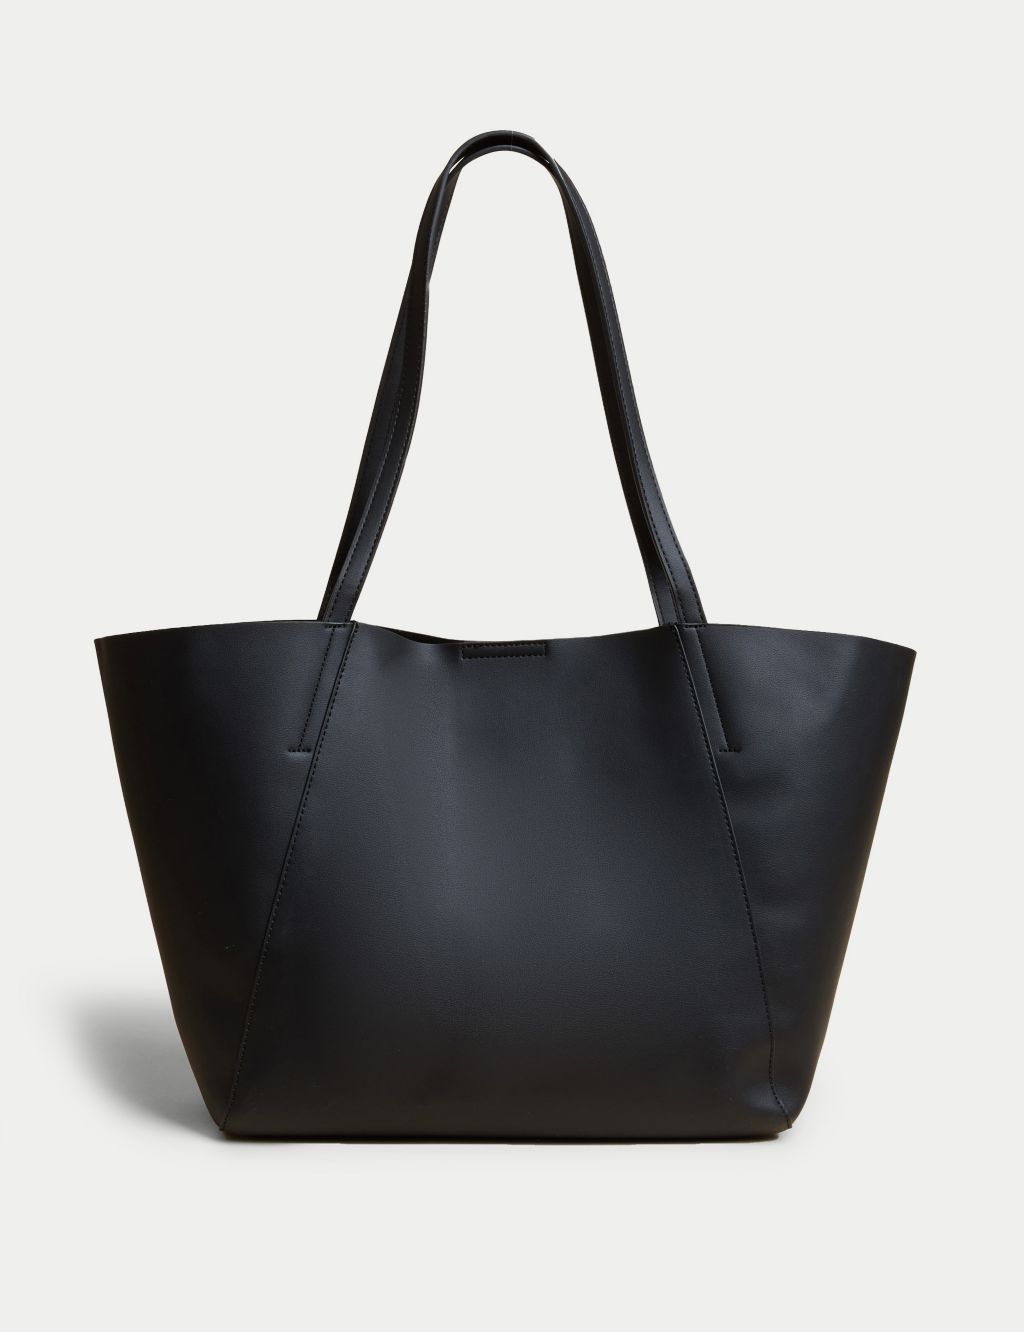 Faux Leather Tote Bag image 1